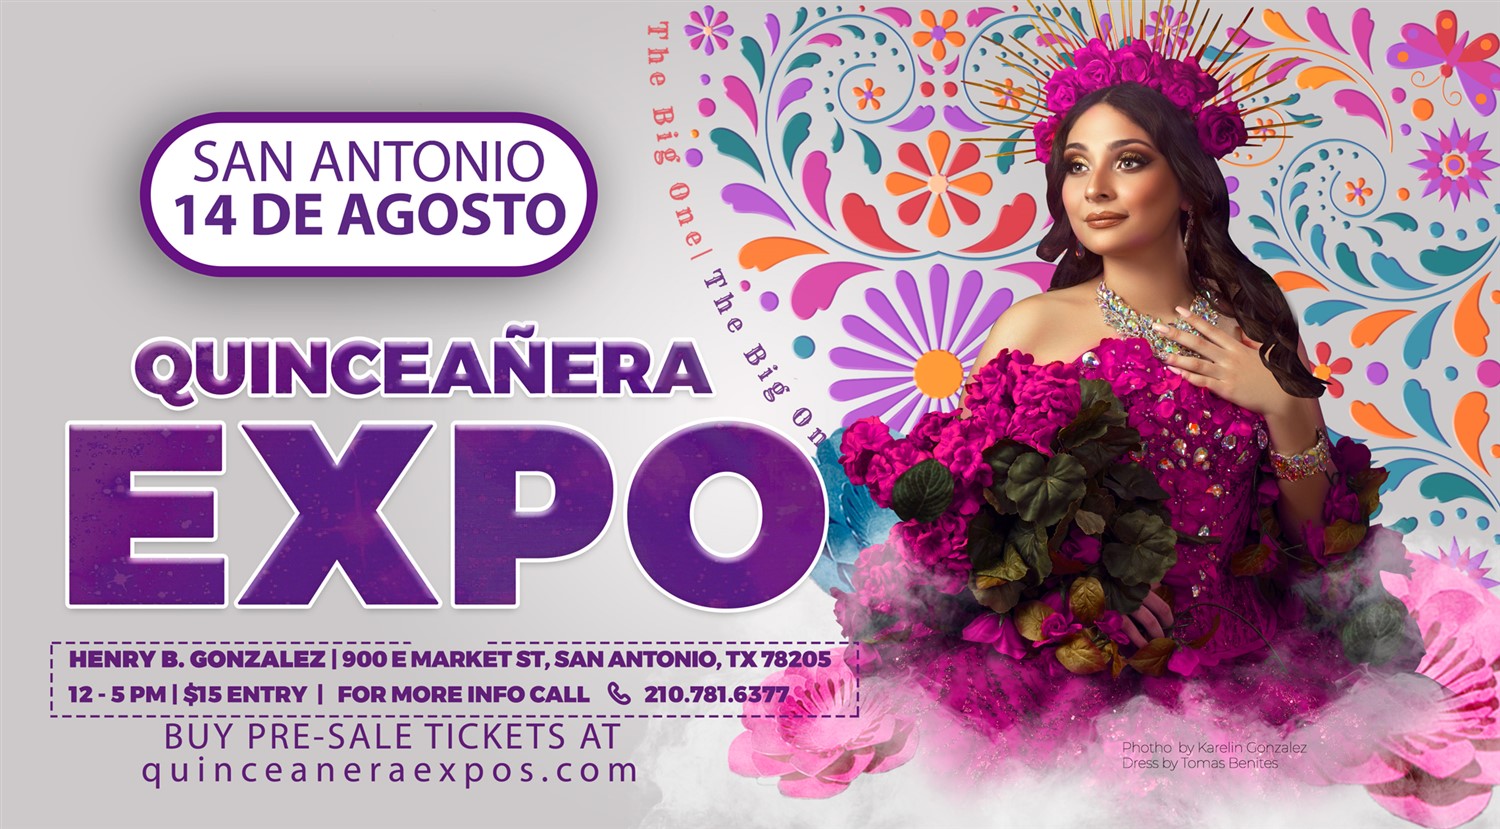 Quinceanera Expo San Antonio August 14th 2022 At the Henry B. Gonzalez Conv.  on ago. 14, 12:00@Henry B. Gonzalez Convention Center - Buy tickets and Get information on Quinceanera Expo 